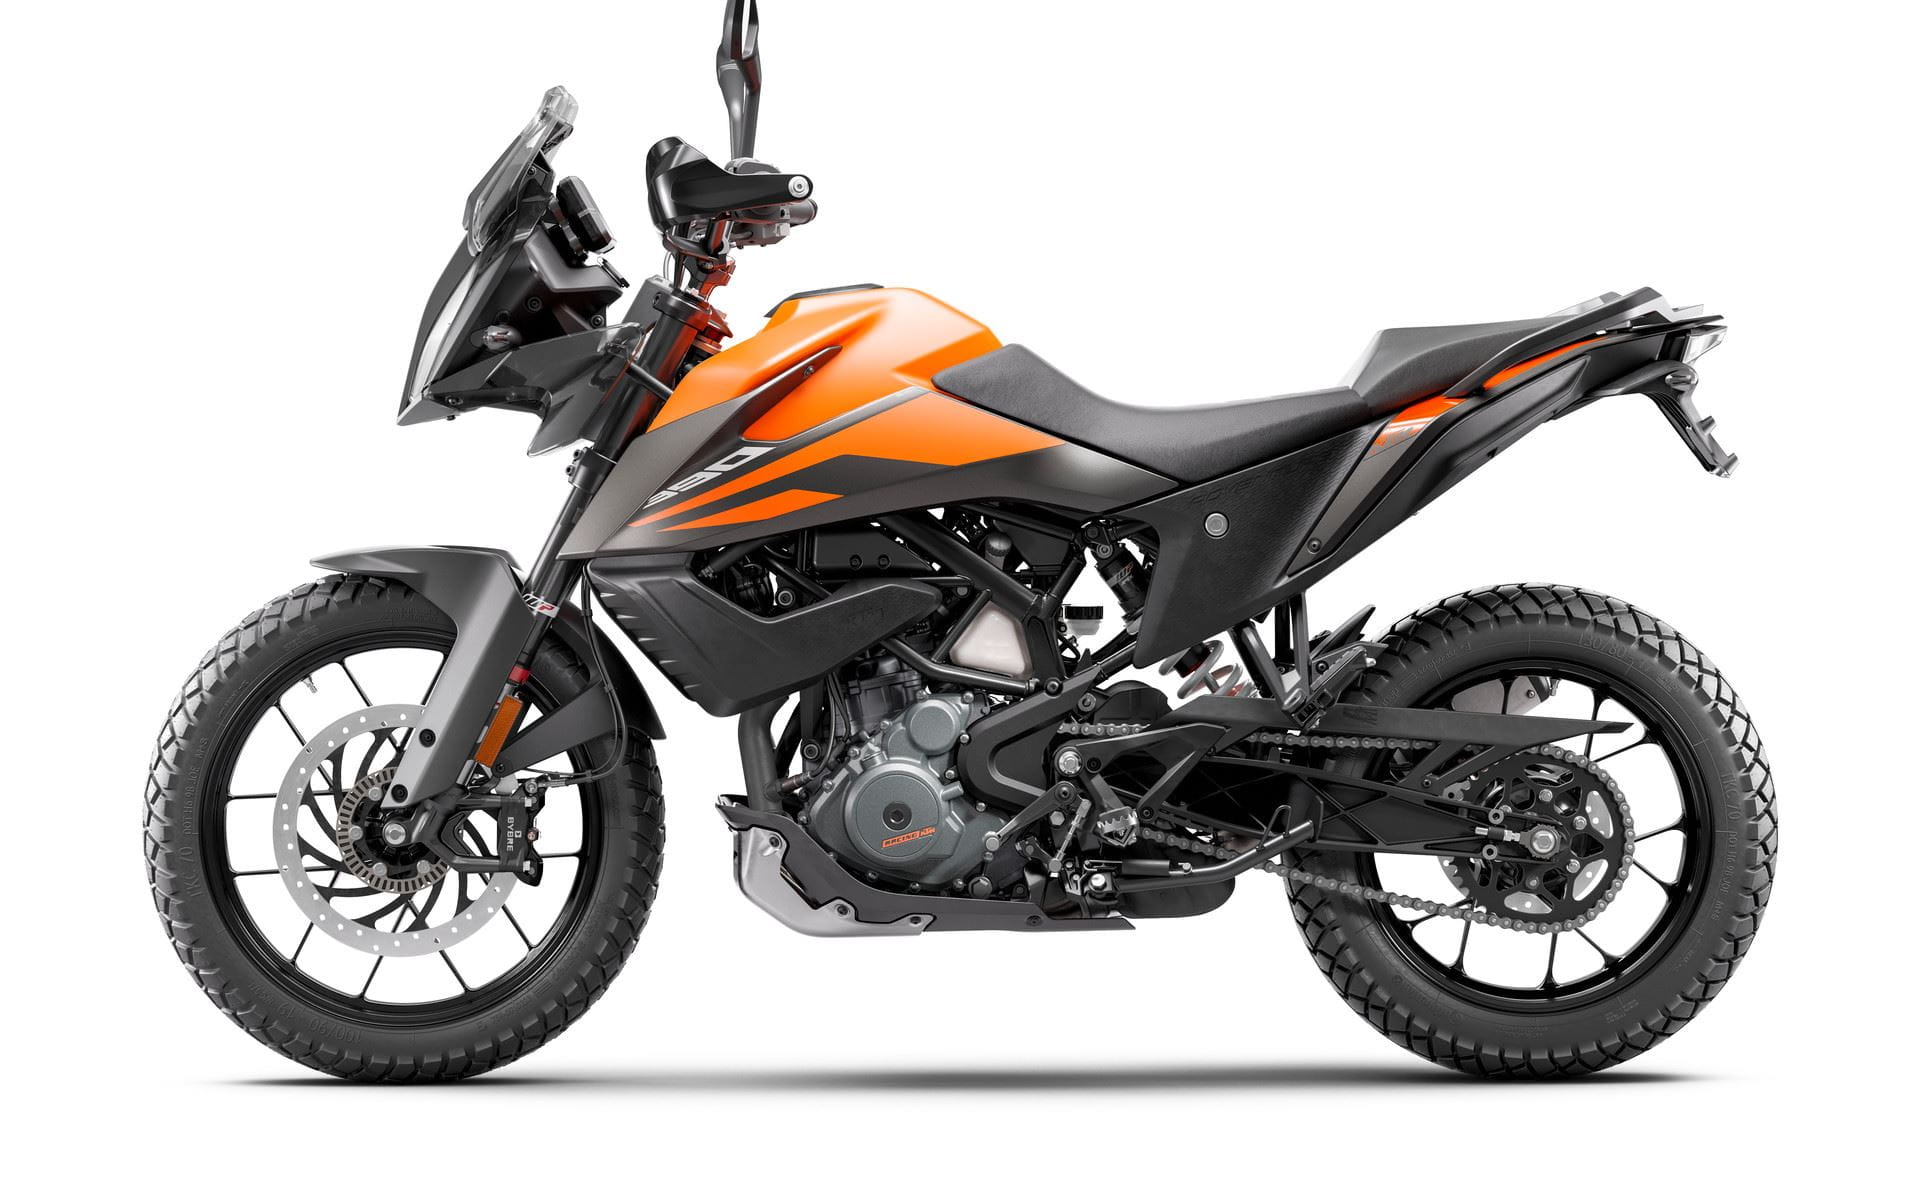 New KTM 390 Adventure released for 2020